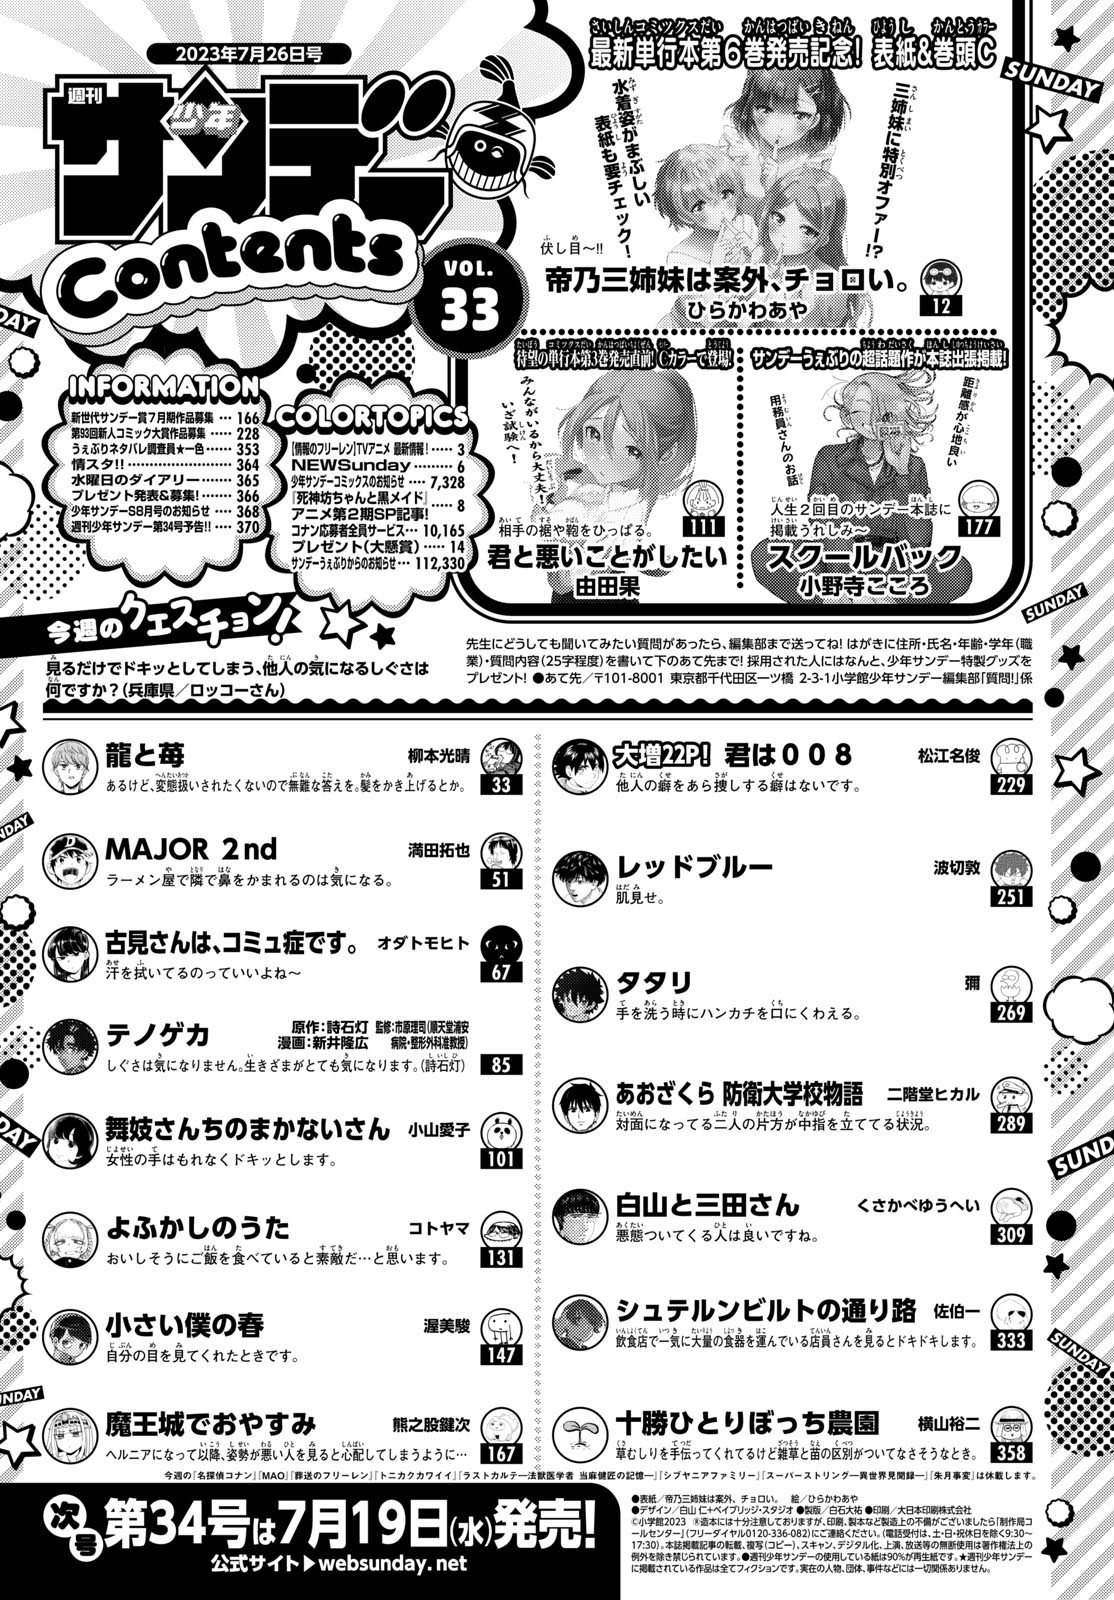 Weekly Shōnen Sunday - 週刊少年サンデー - Chapter 2023-33 - Page 368